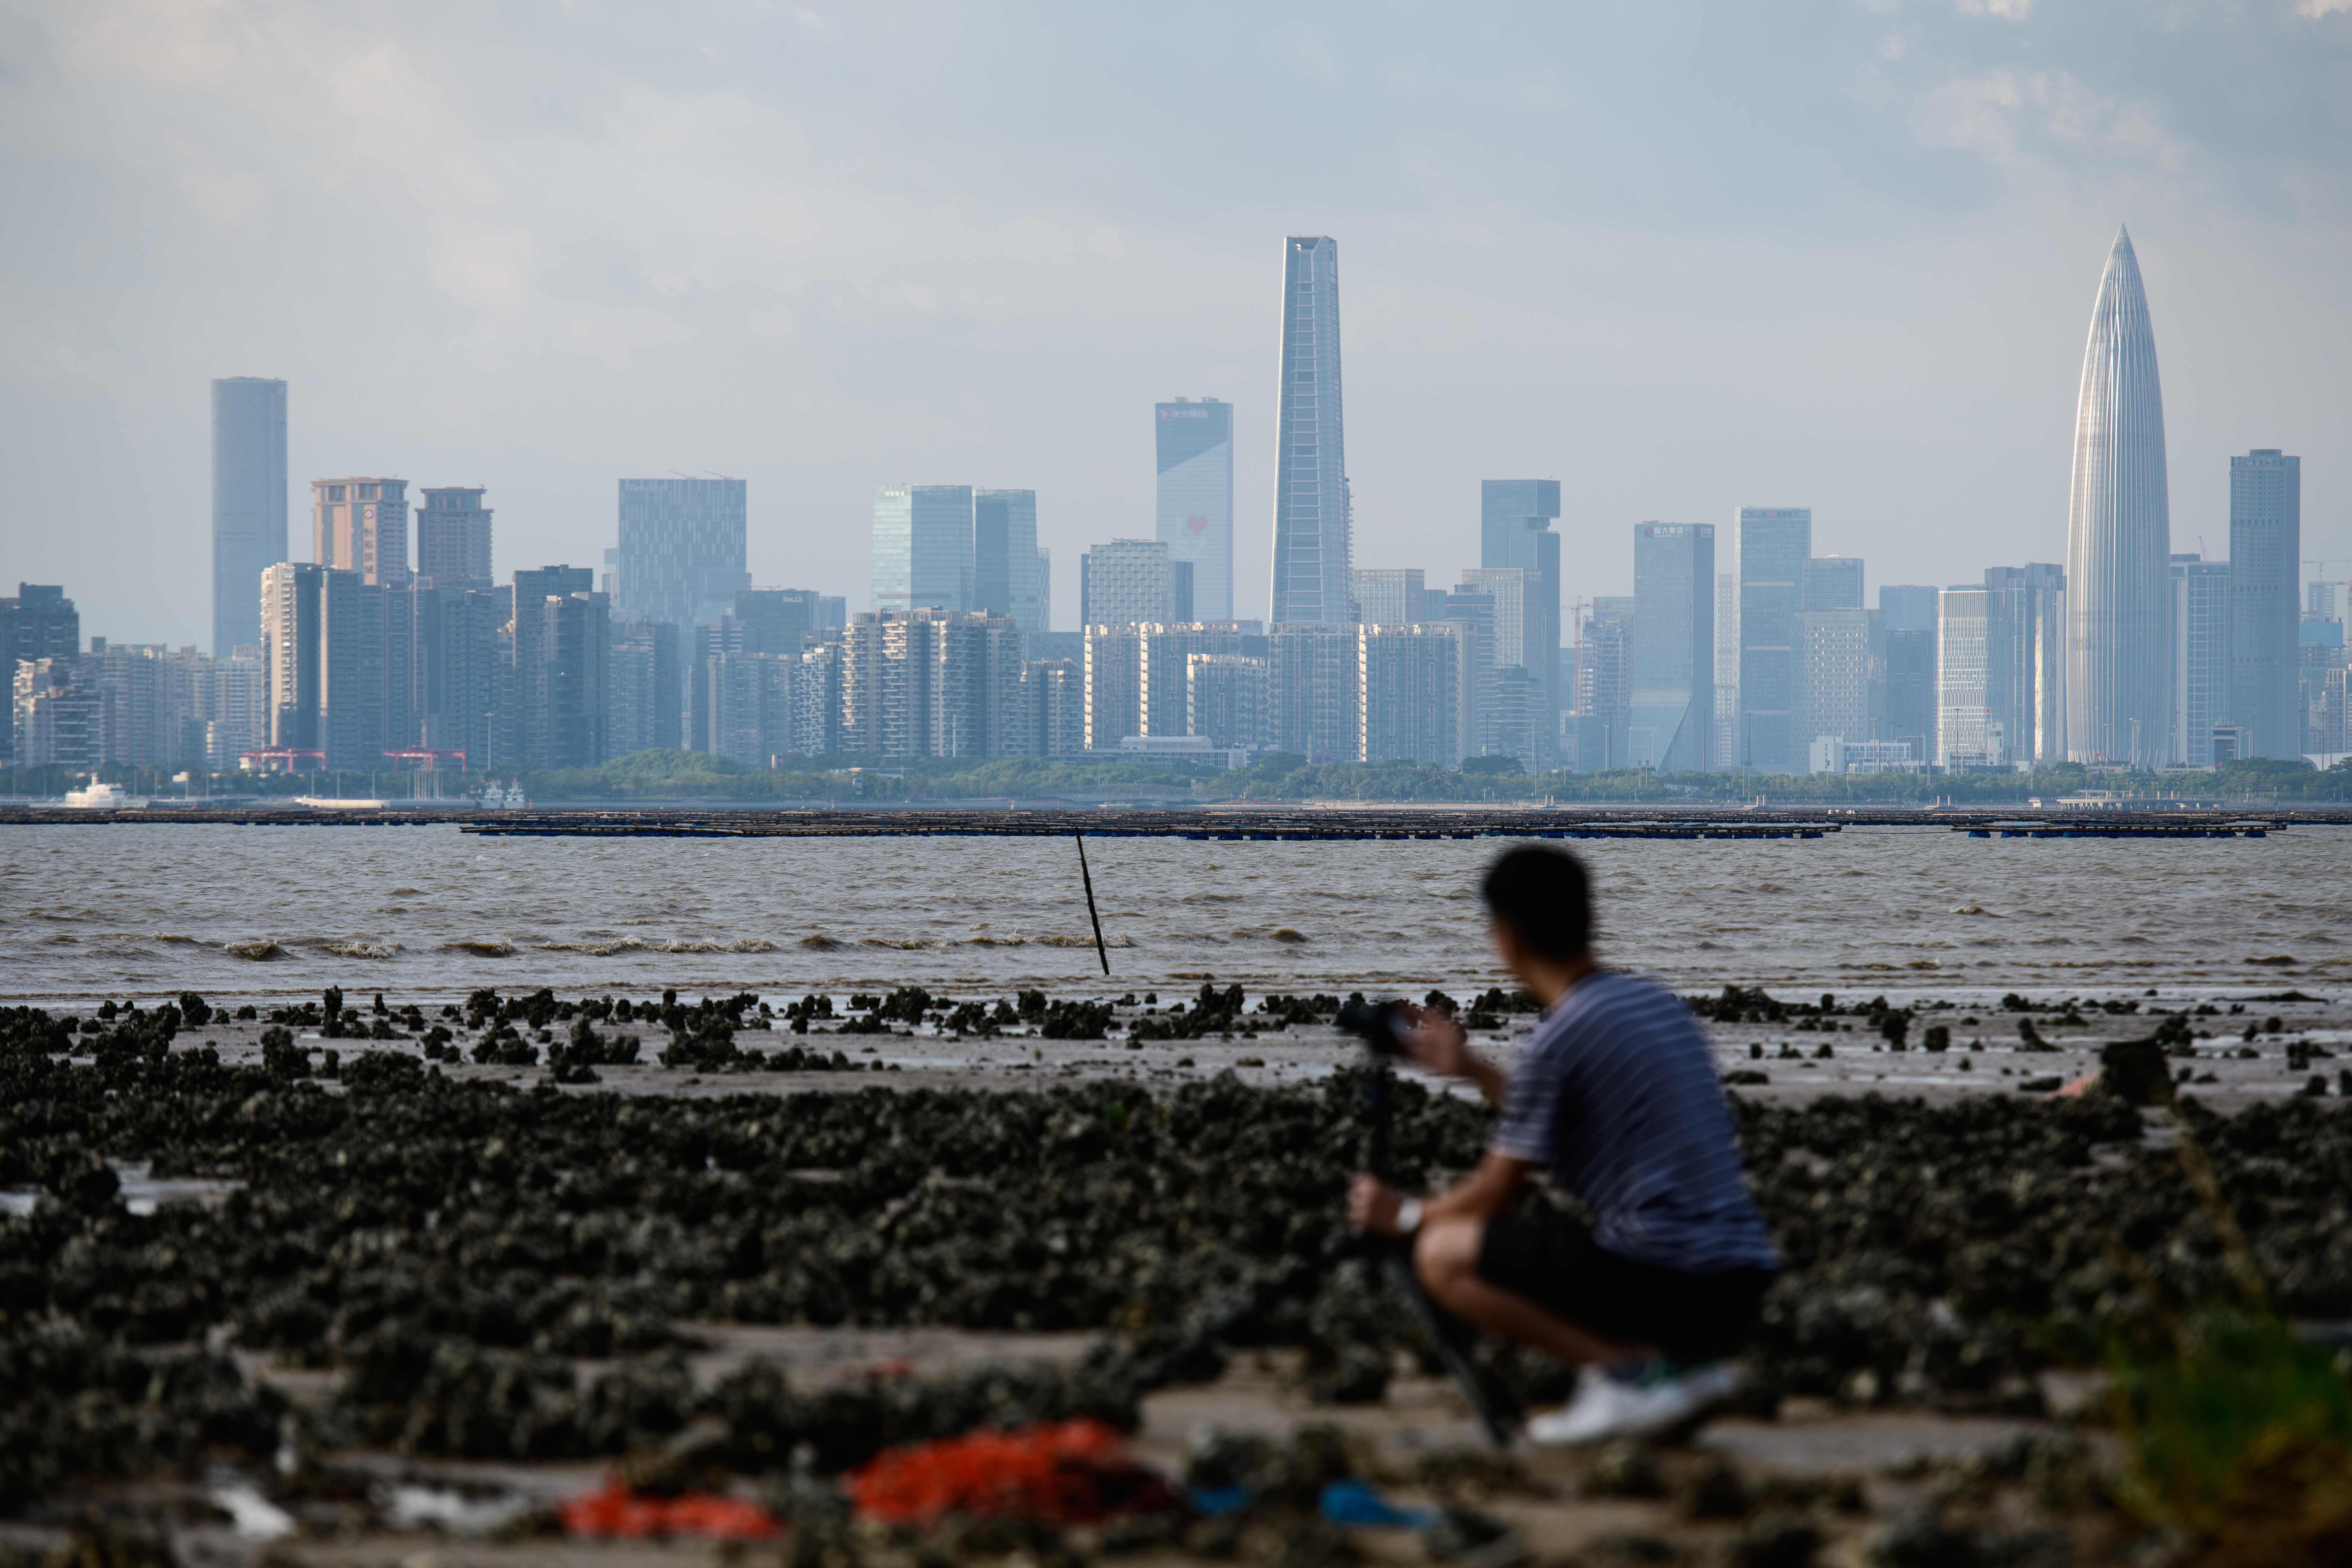 A man looks across Deep Bay towards Shenzhen. Being closest to Shenzhen and the other Greater Bay Area cities, New Territories North could more easily build economic links with these cities. The area not only serves the 7.3 million people in Hong Kong but also potentially the 40 million in the eastern part of the Greater Bay Area, encompassing Shenzhen, Dongguan, Guangzhou and Huizhou. Photo: AFP